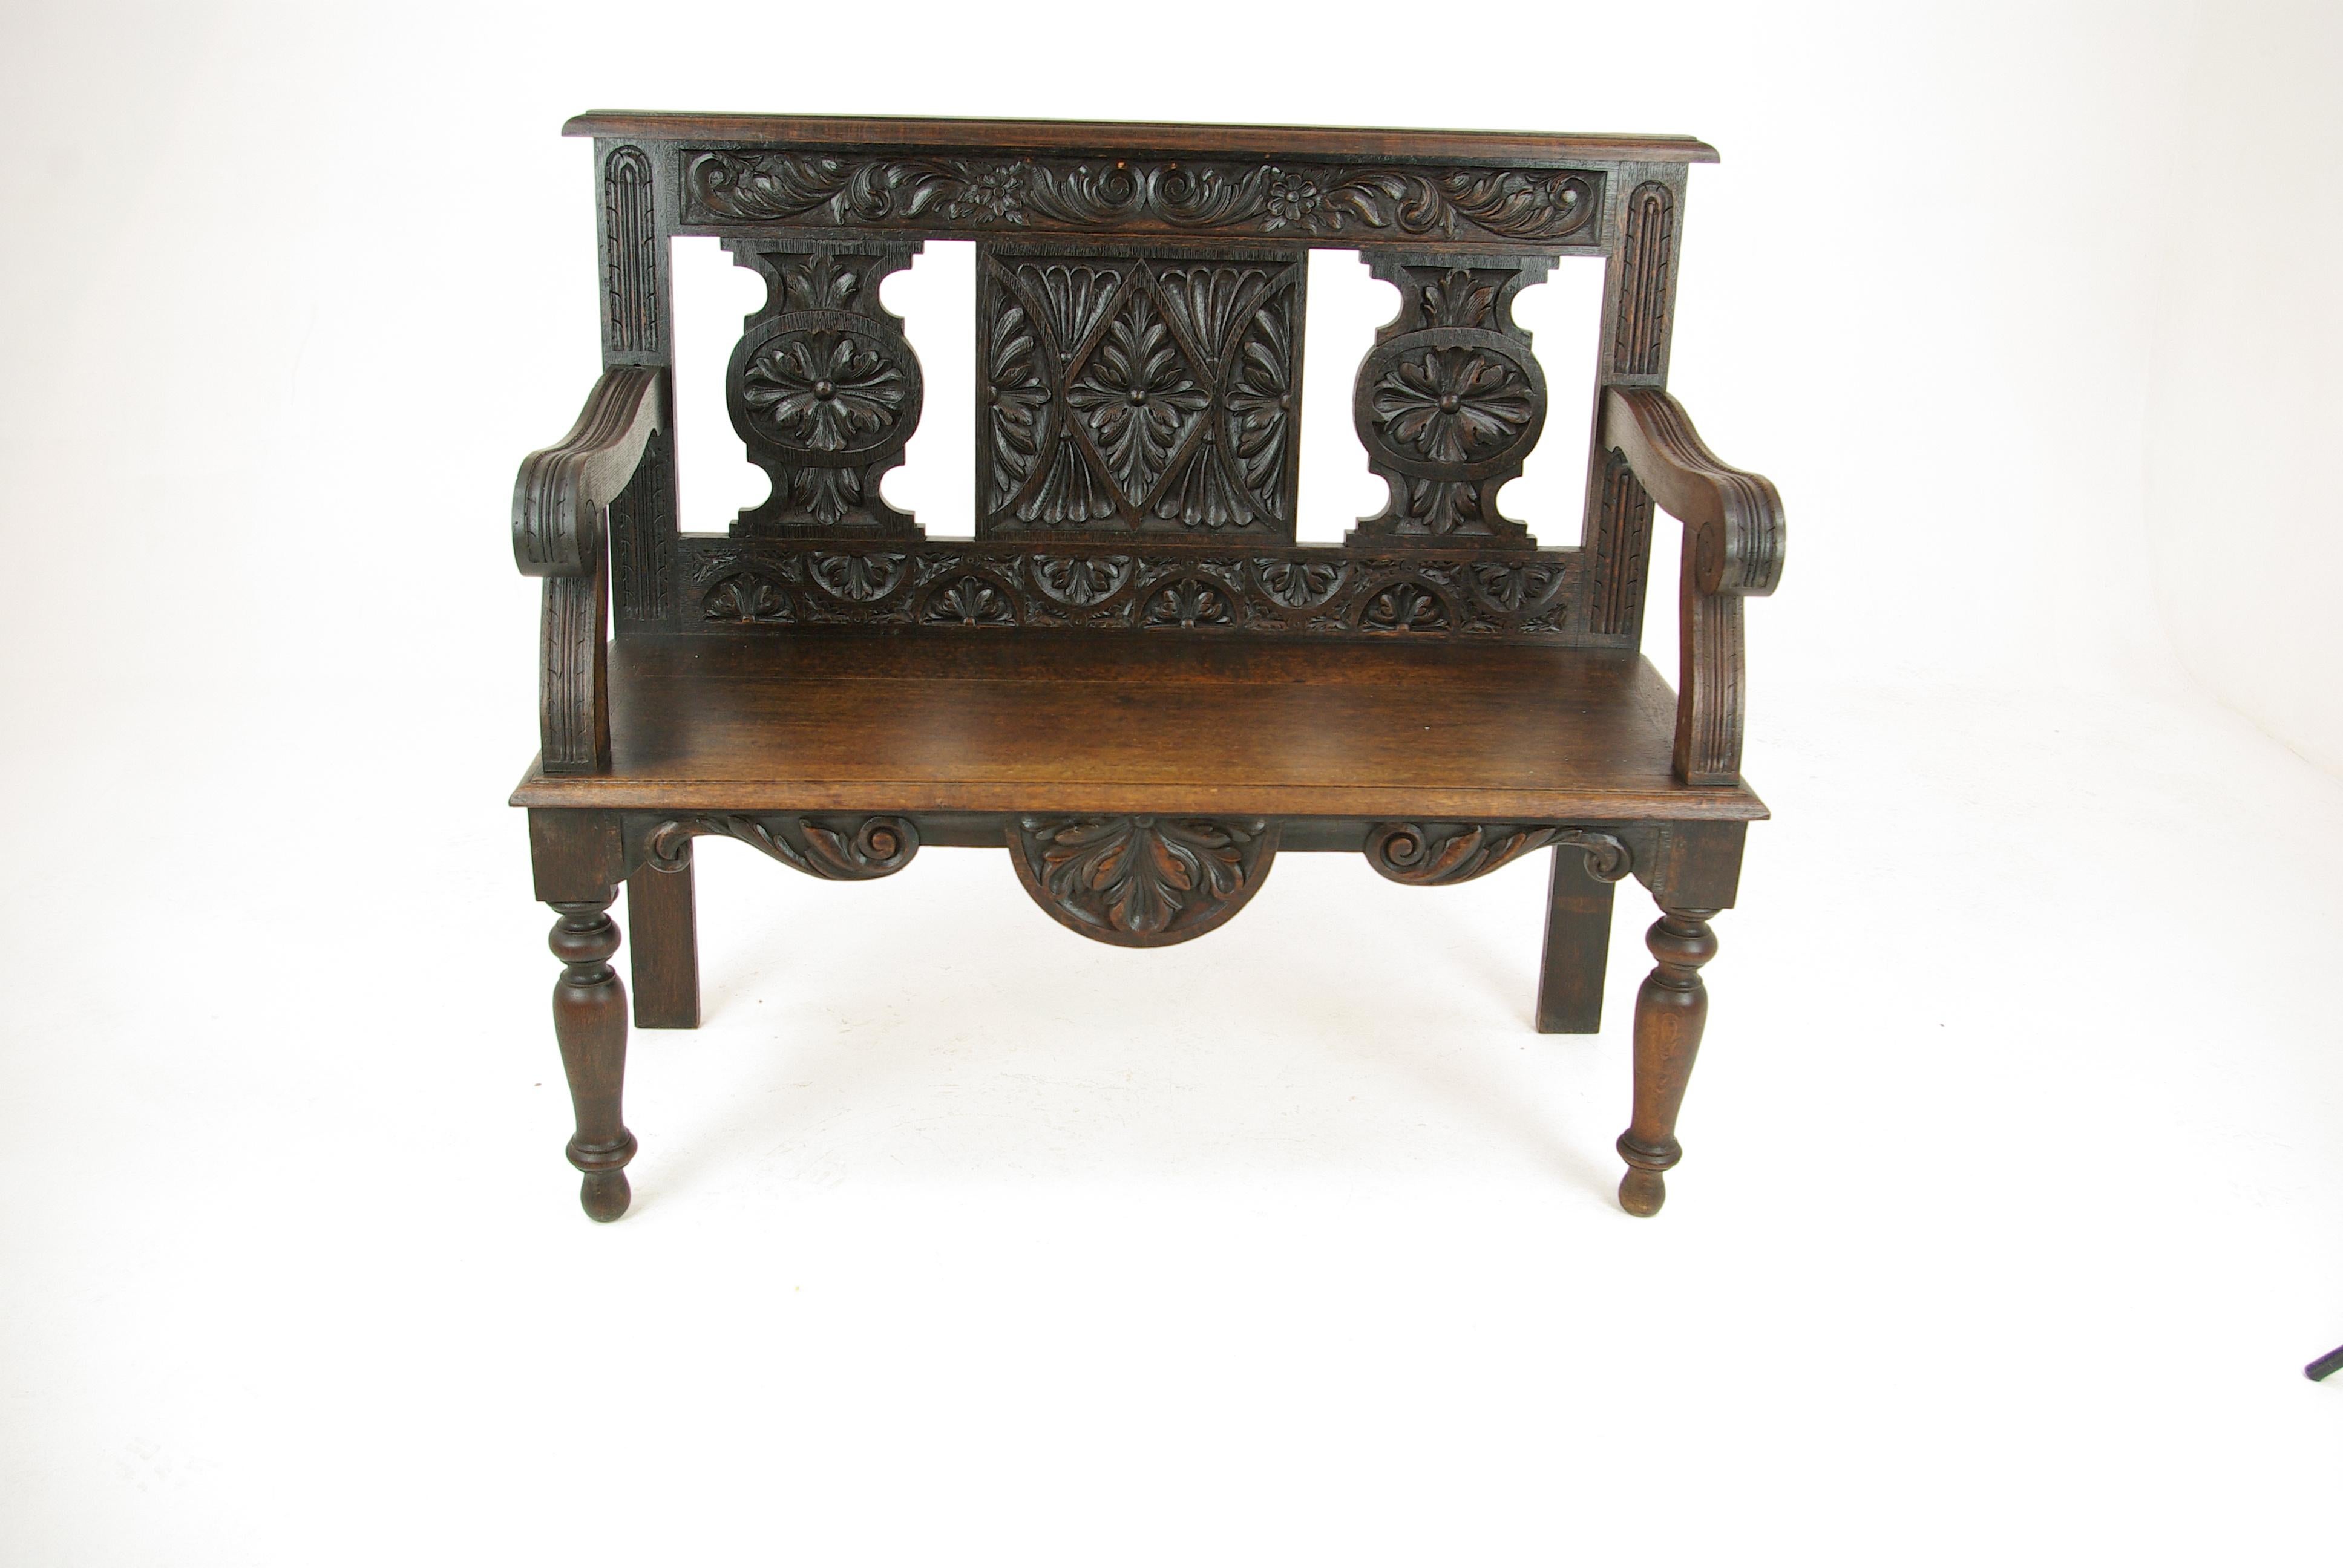 Hall bench, hall seat, carved oak bench, entryway furniture, Scotland, 1880, Antique Furniture, B1181.

Scotland, 1880.
Solid oak construction
Original finish
Heavily carved open back
Solid oak seat
Pair of thick rolled arms
Carved skirt